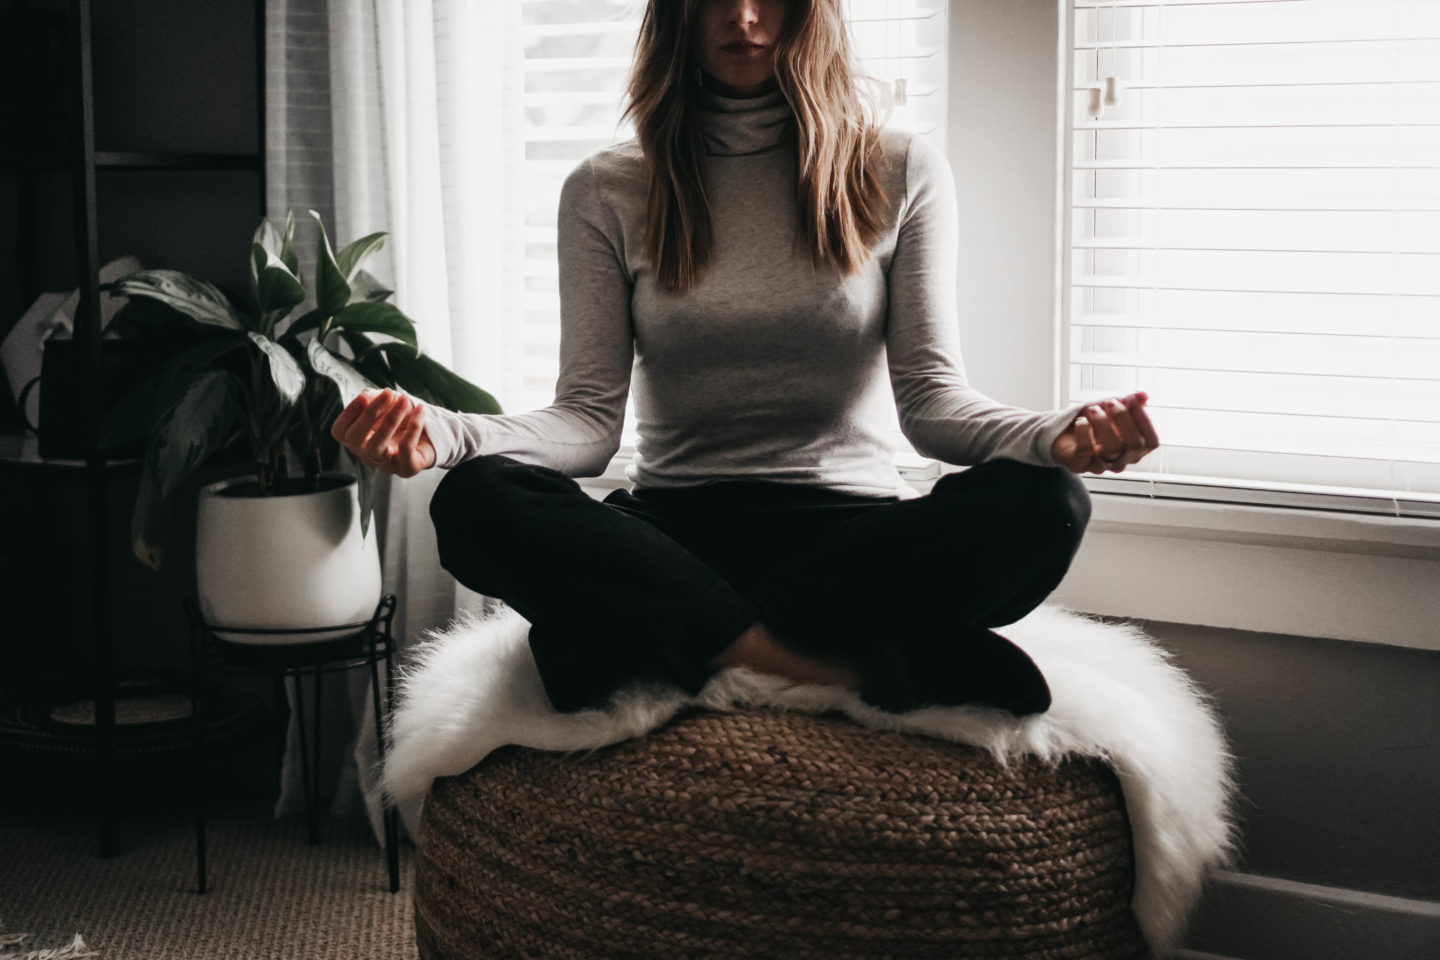 The Grey Edit - Daily Morning Routine - 7 Step Wellness Ritual - Meditate